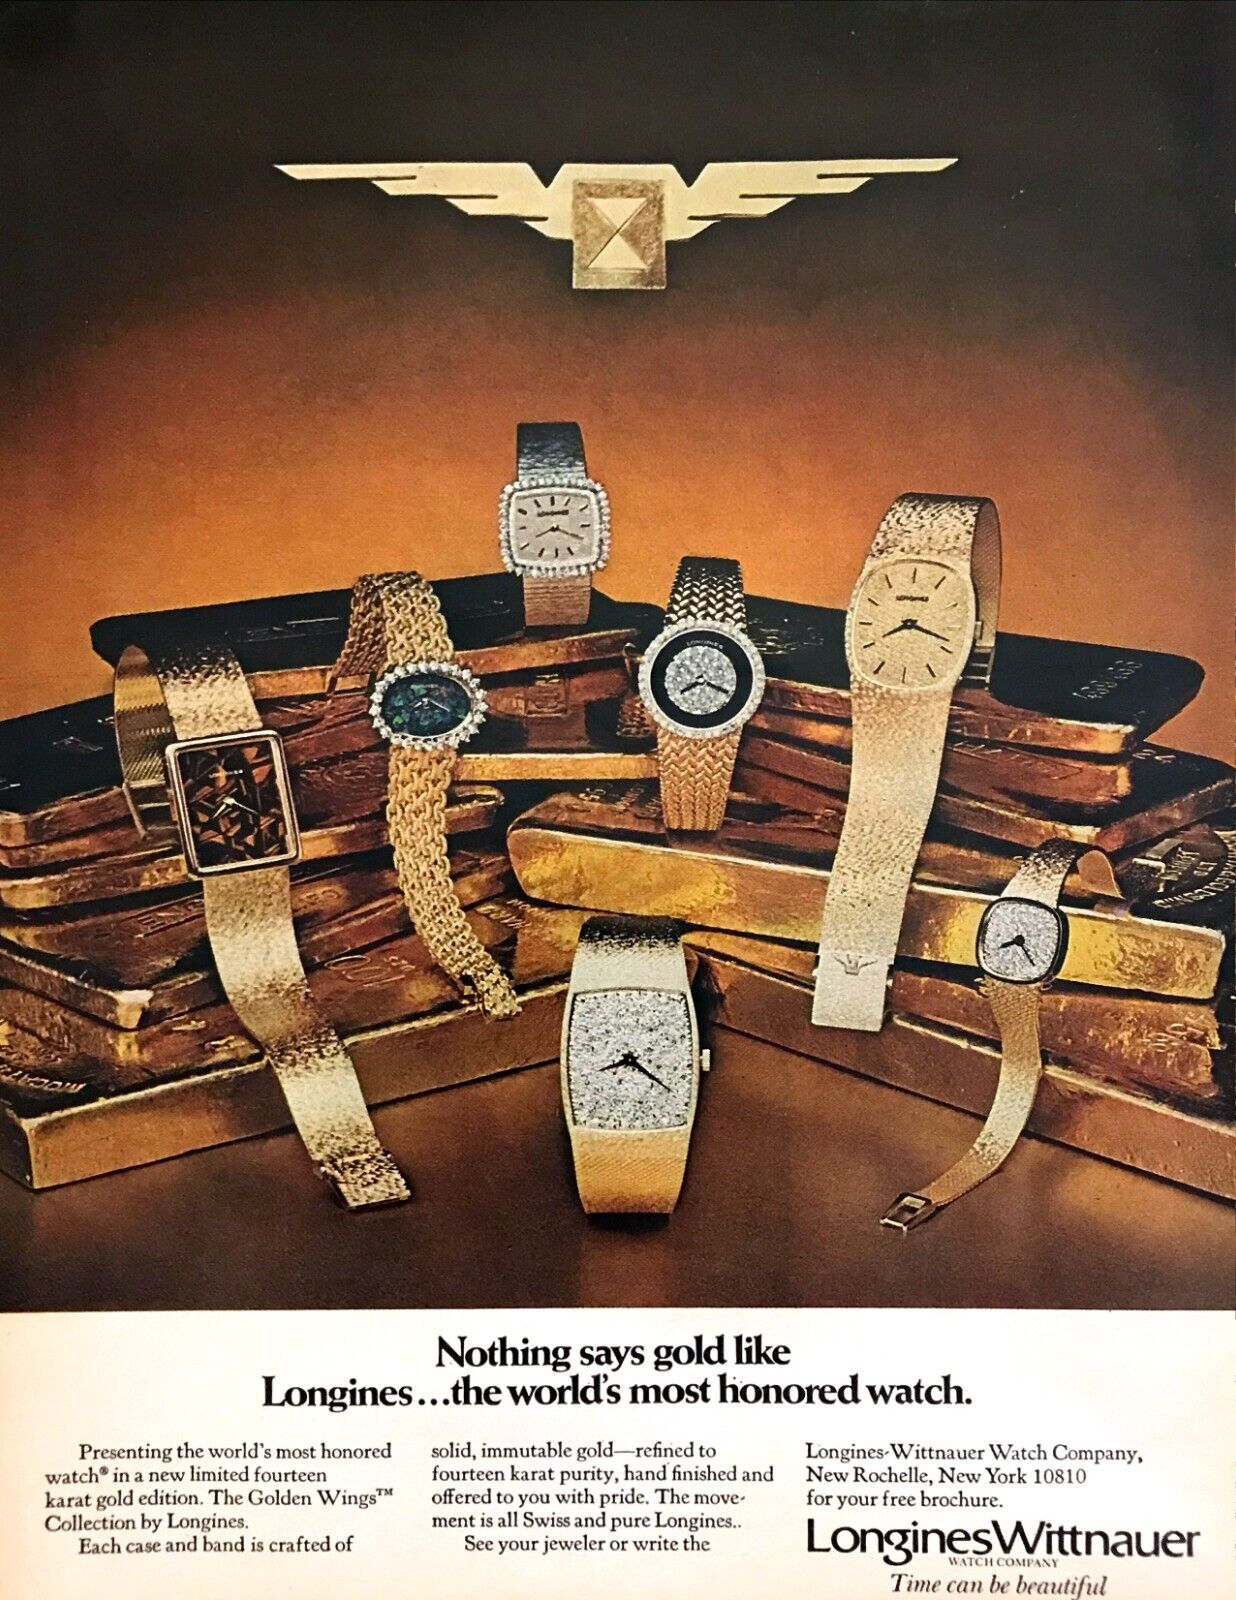 1977 Longines Wittnauer The Golden Wings 14kt Gold Watch photo vintage print ad